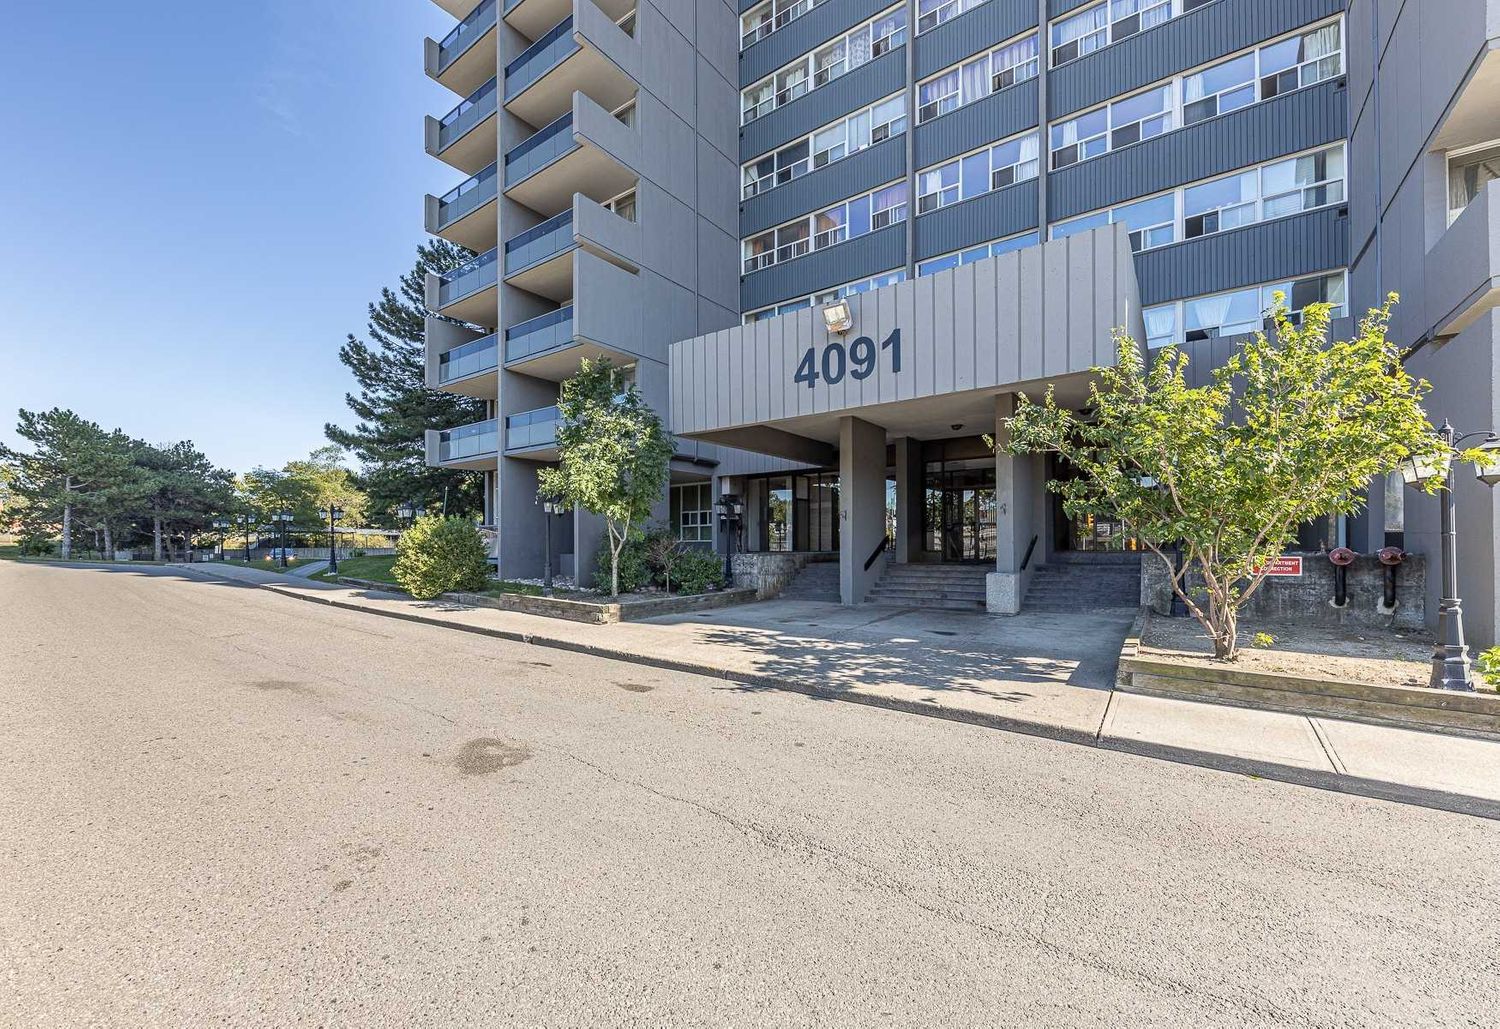 4101 Sheppard Avenue E. 4091-4101 Sheppard Avenue East Condos is located in  Scarborough, Toronto - image #2 of 2